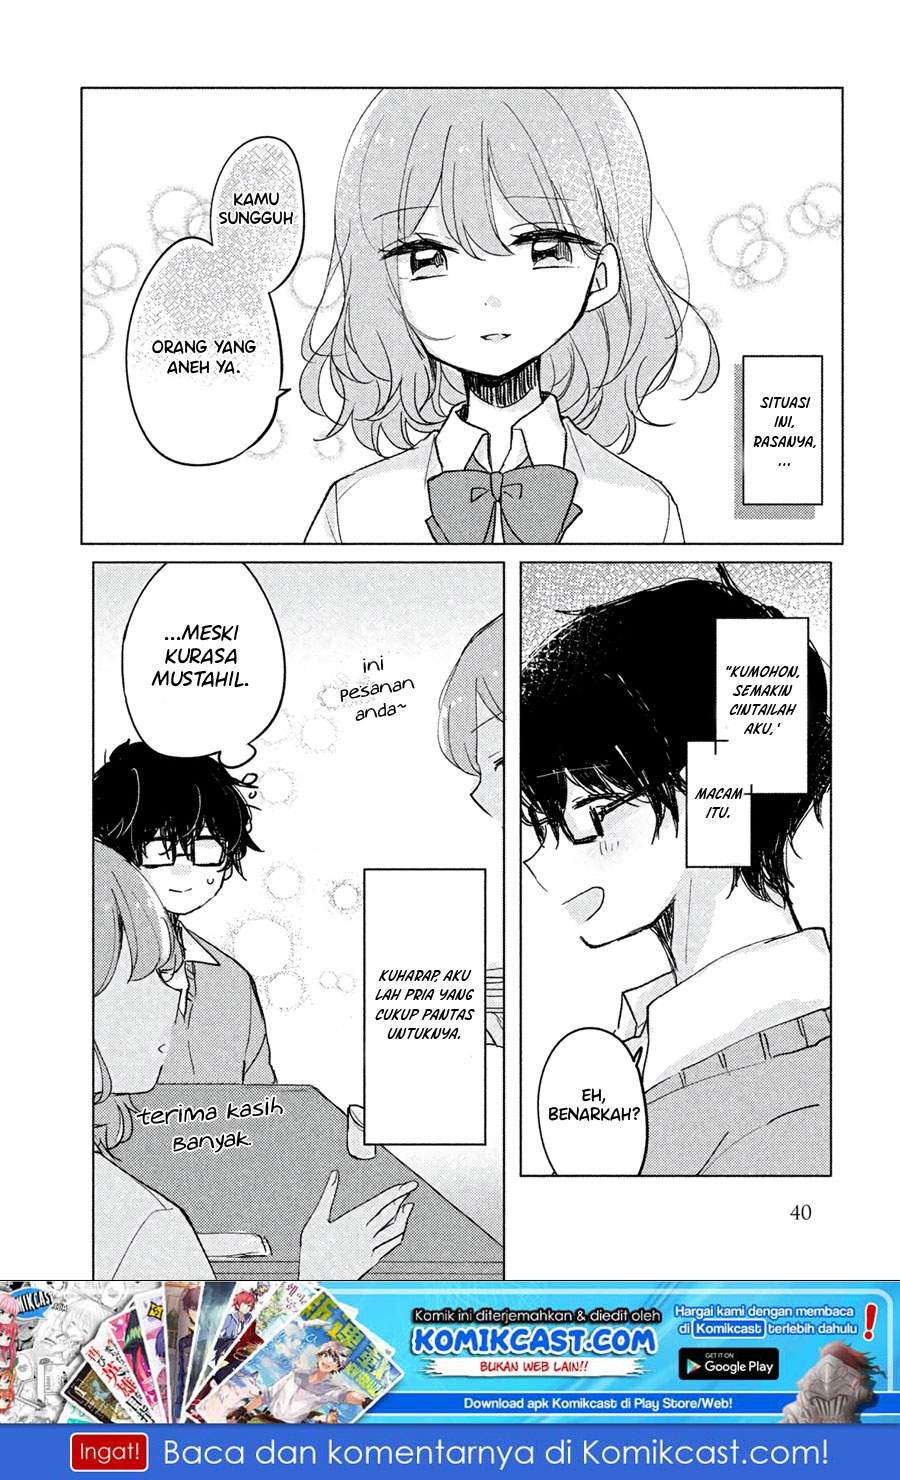 It’s Not Meguro-san’s First Time Chapter 03 Bahasa Indonesia